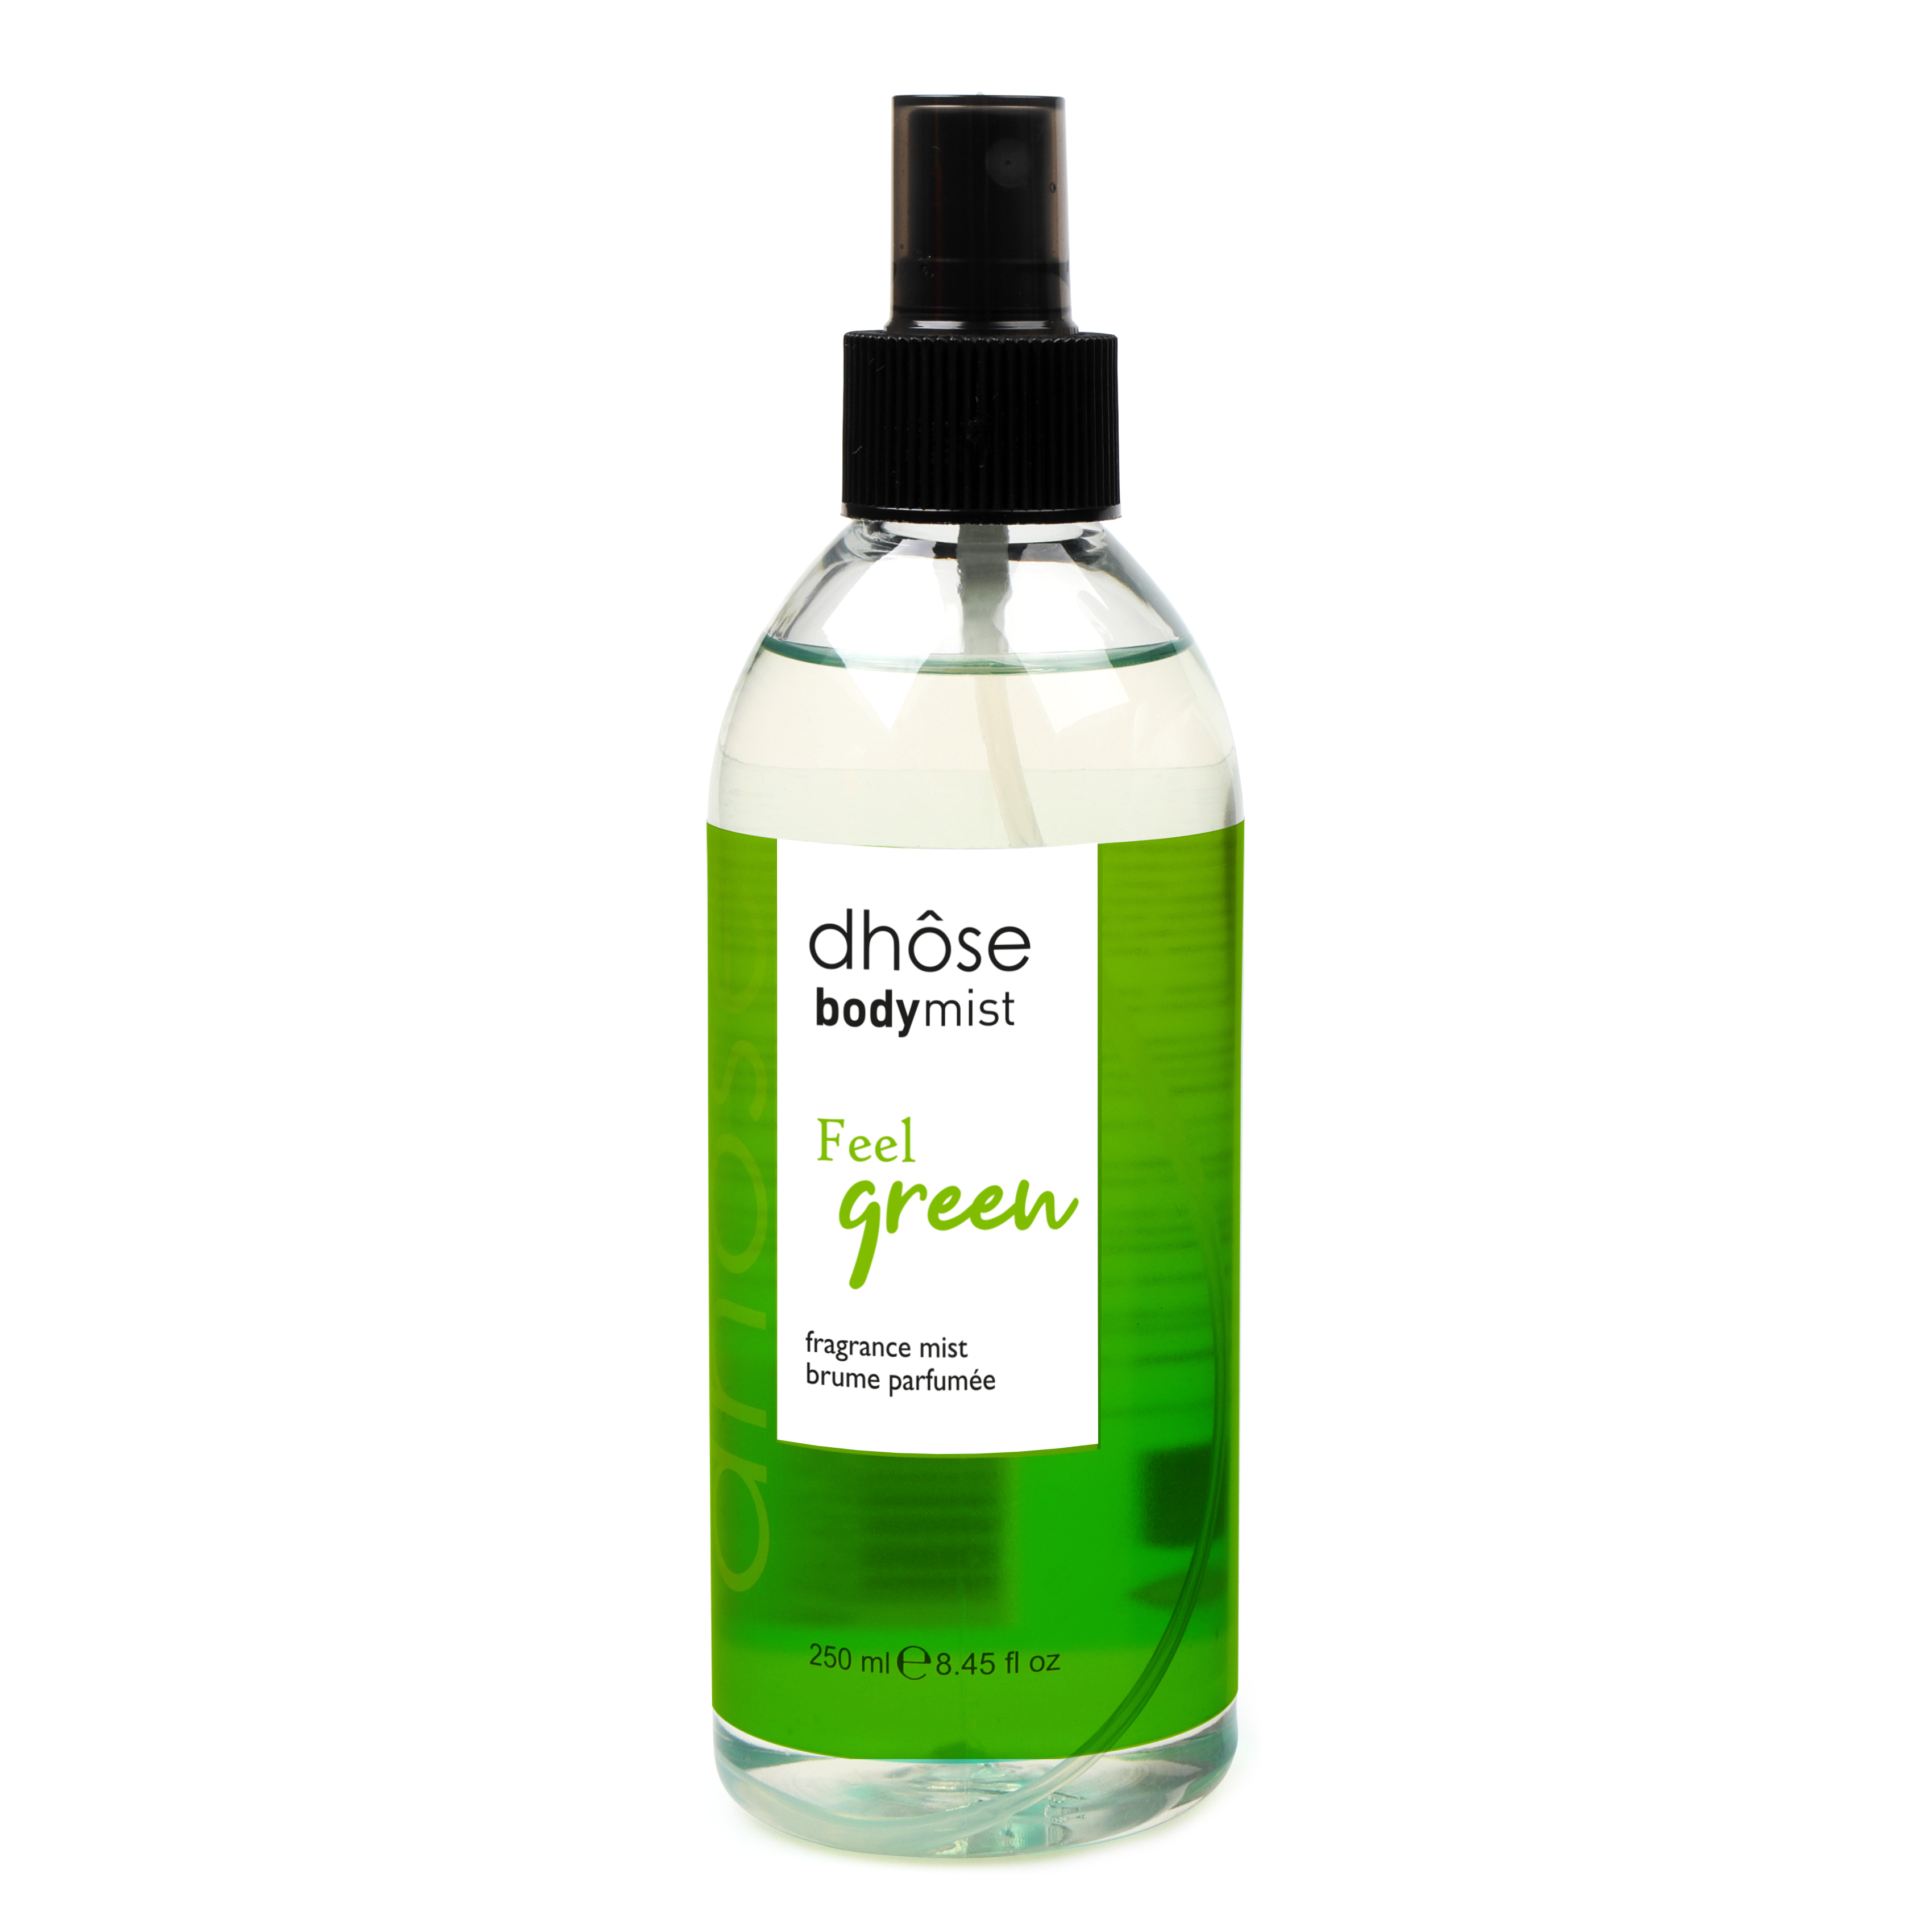 Dhose Bodymist Feel Green 250ml Isabelle Dupont 1014BMGREEN-1 – ISABELLE DUPONT – nj_1014BMGREEN-1